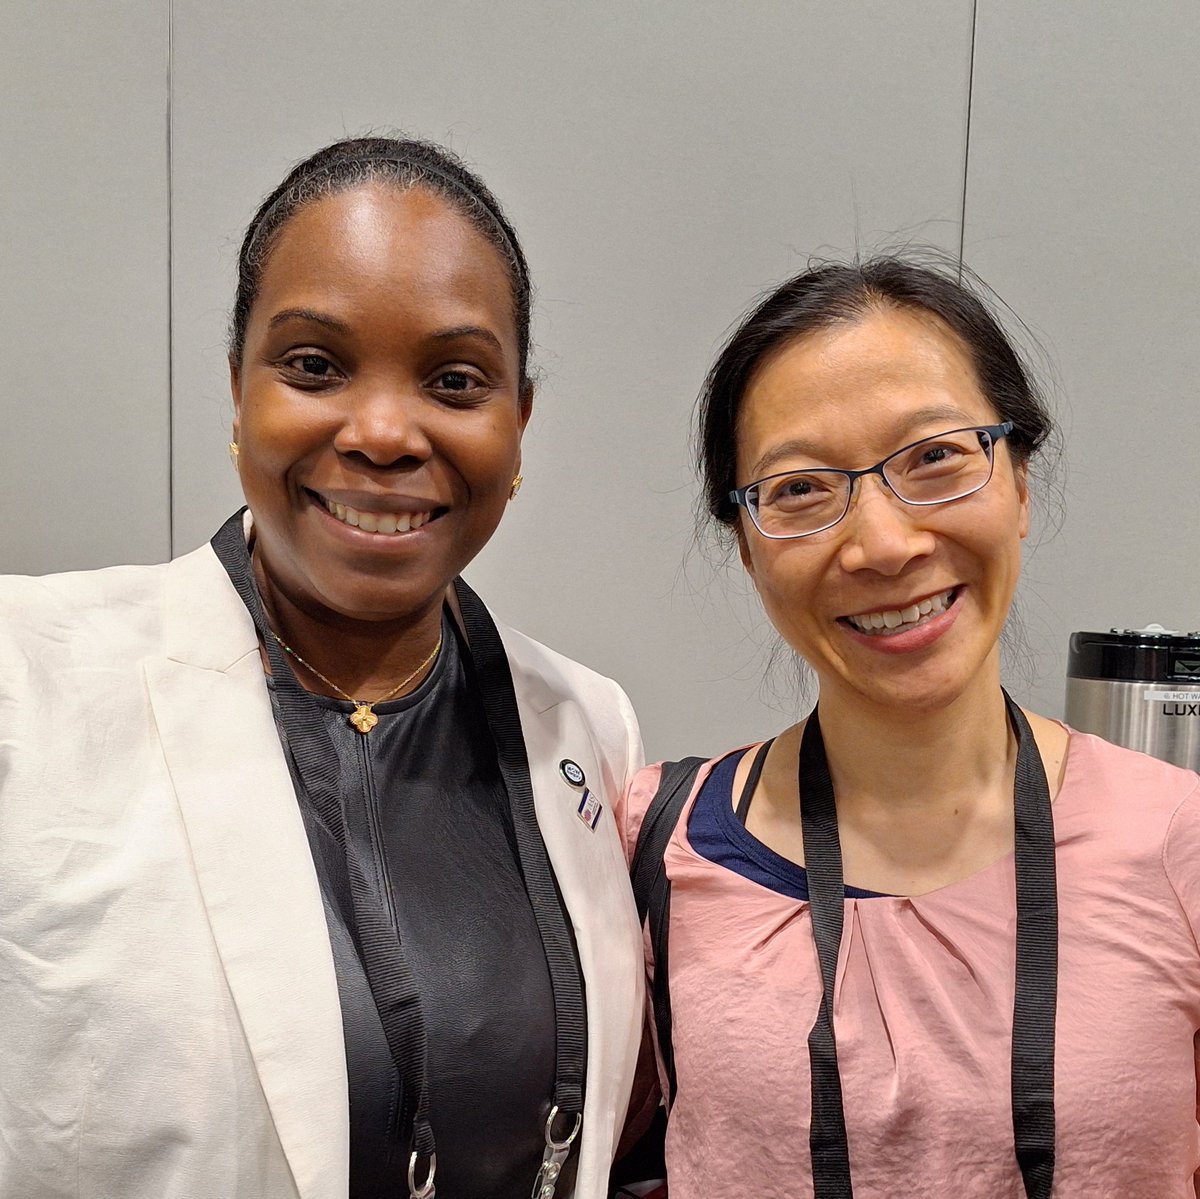 OMG OMG OMG finally met @DrCNClarke IRL. Such a trailblazer in surgery and an inspiration to so many 🙏❤️🎉 #ILookLikeASurgeon #DiversityAndInclusion #RACS24